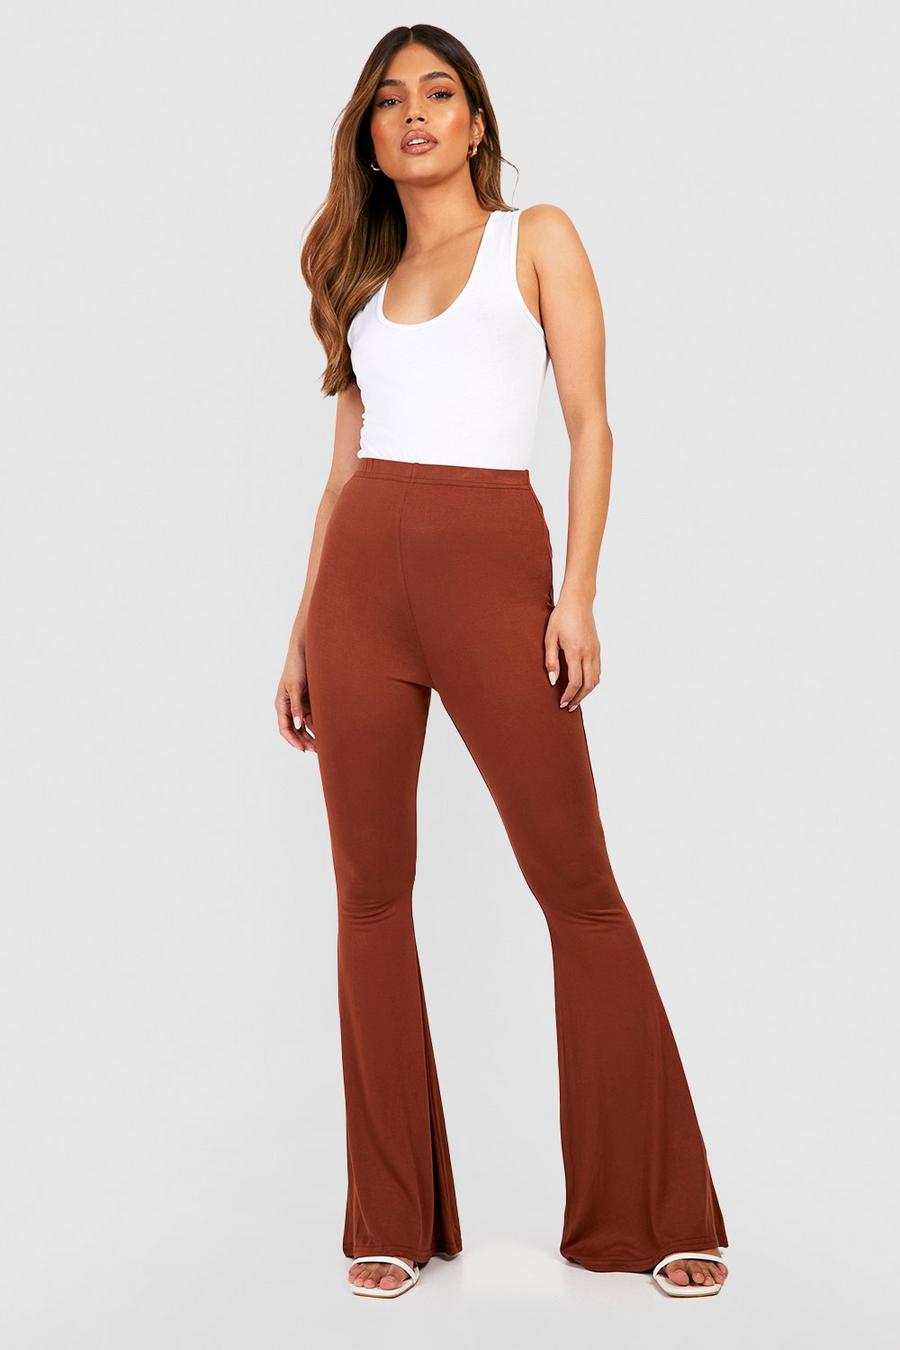 Chocolate Jersey Knit High Waisted Flared Pants image number 1